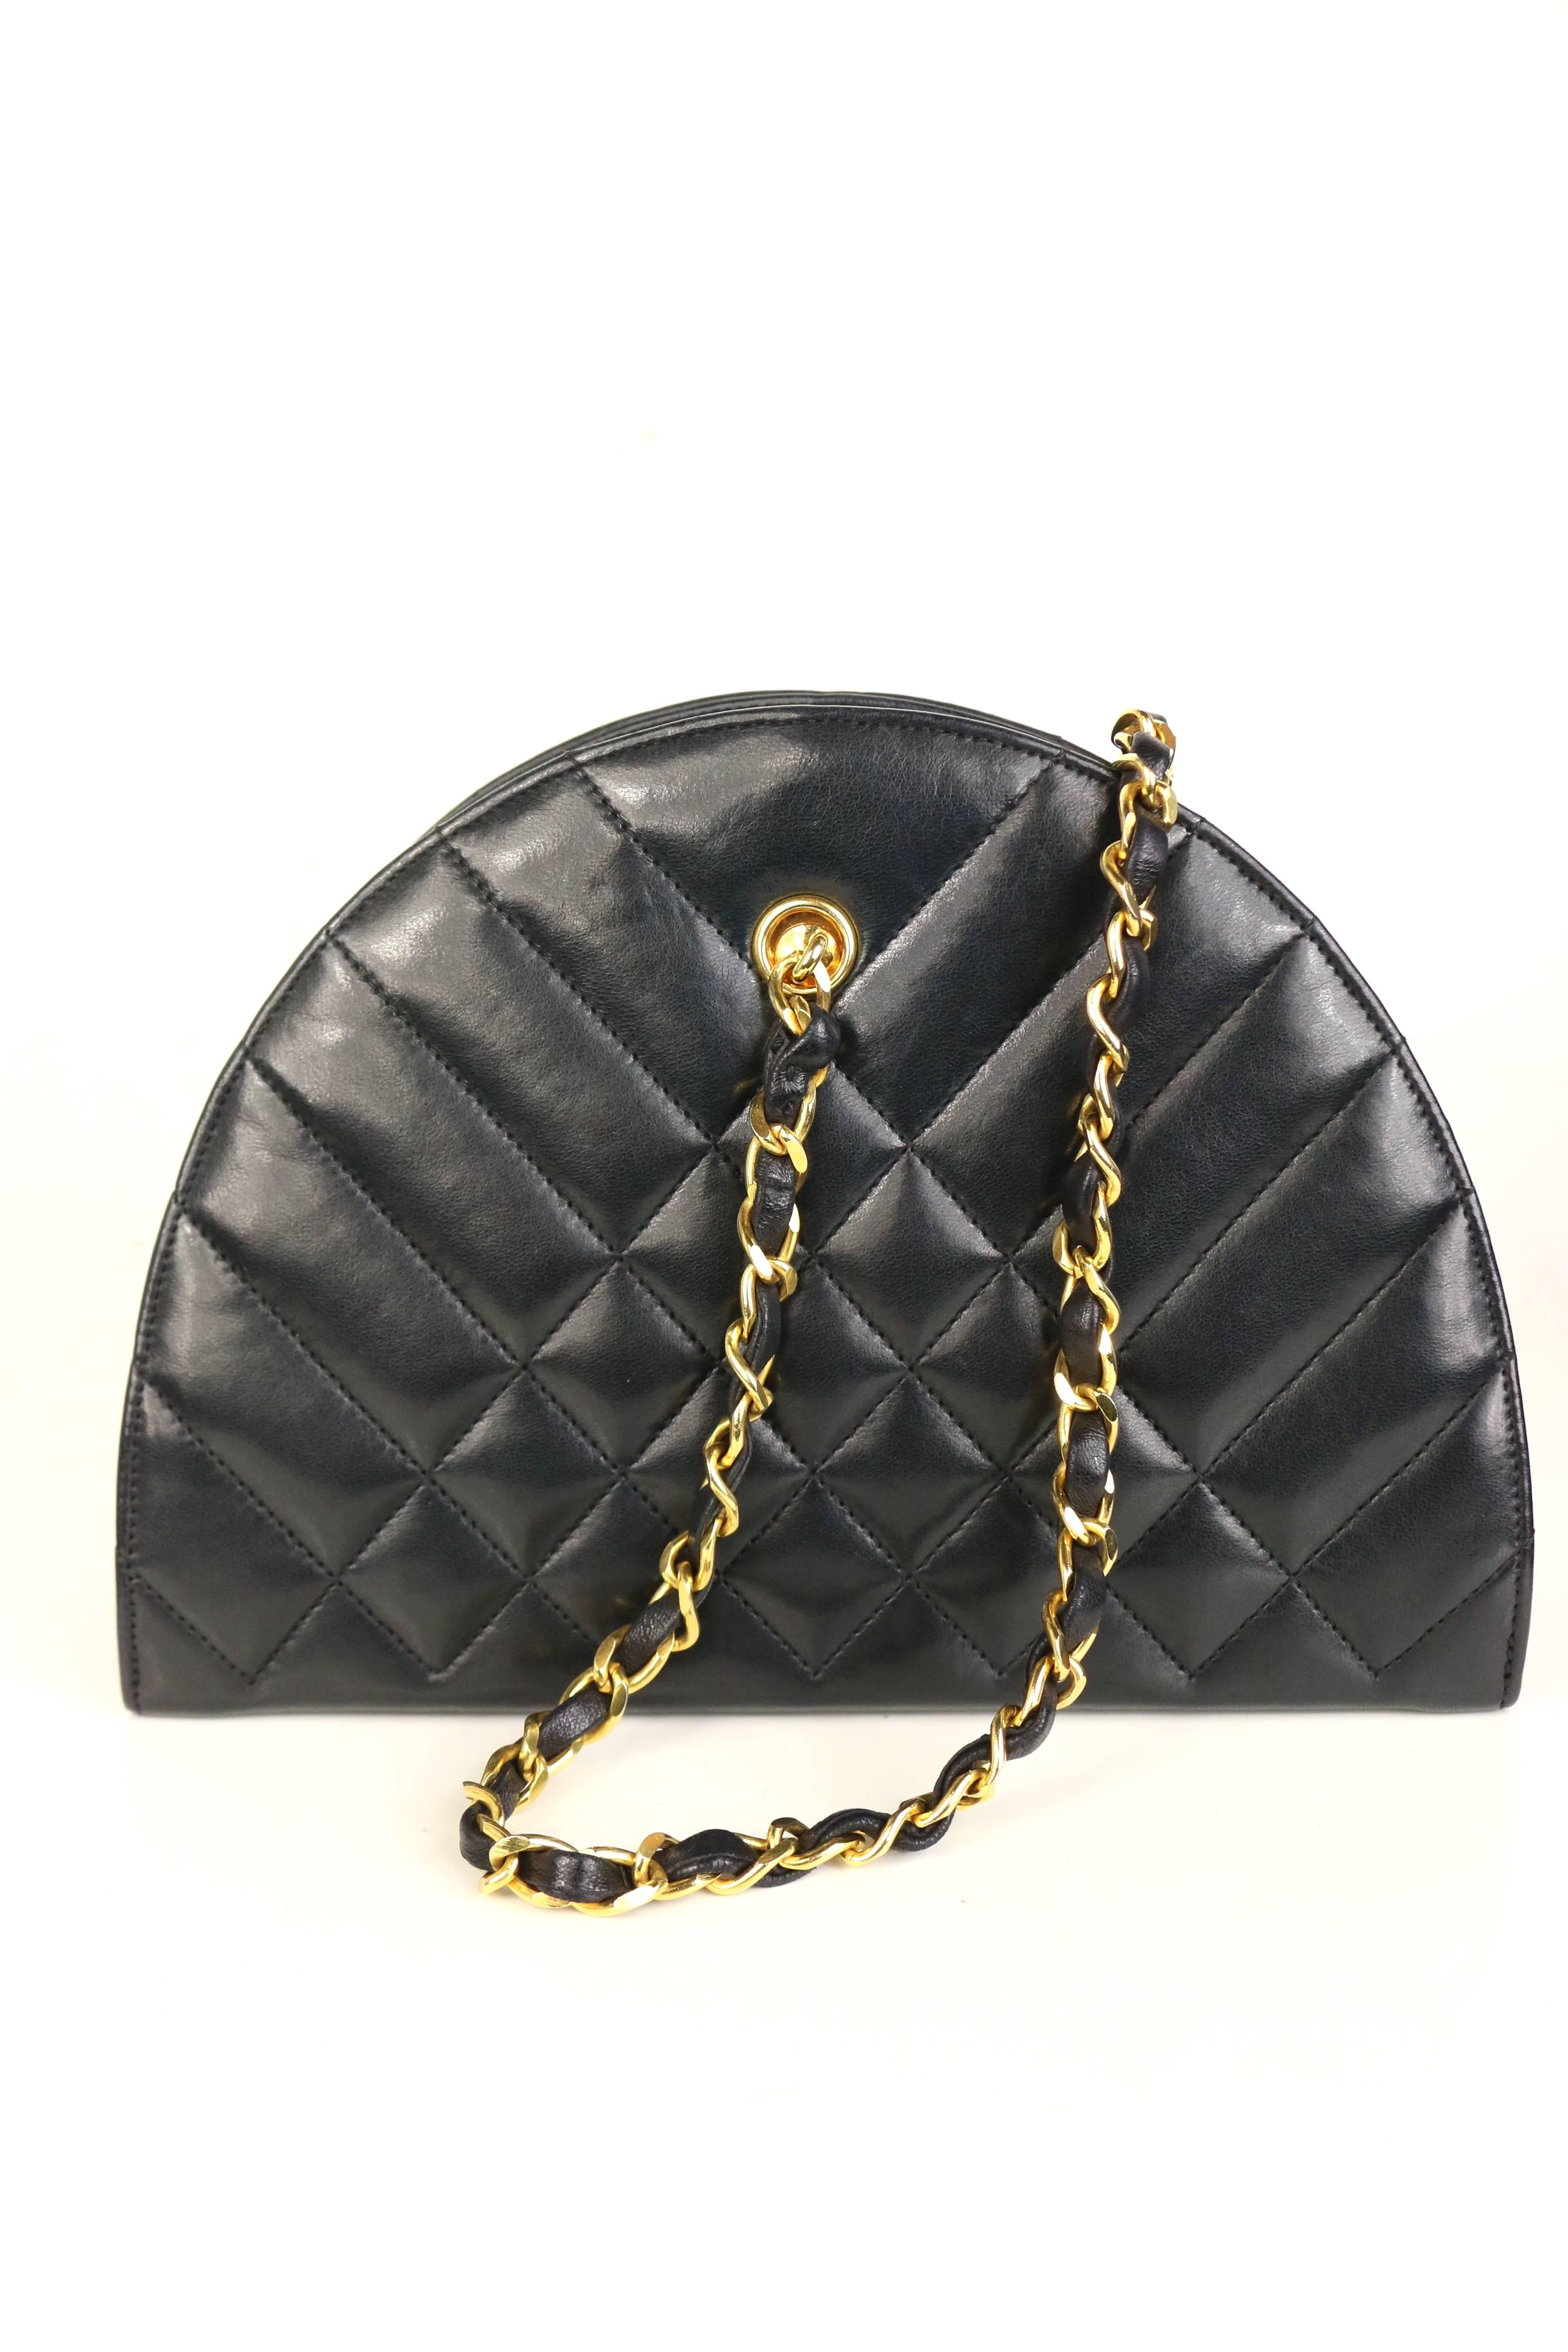 - Vintage 1989-1991 Chanel black half round lambskin leather quilted shoulder bag. You can carry it as a clutch as well. It is a really rare item!

- Featuring a top zip fastening, a chain shoulder strap and an internal slip pocket.  

- Serial No: